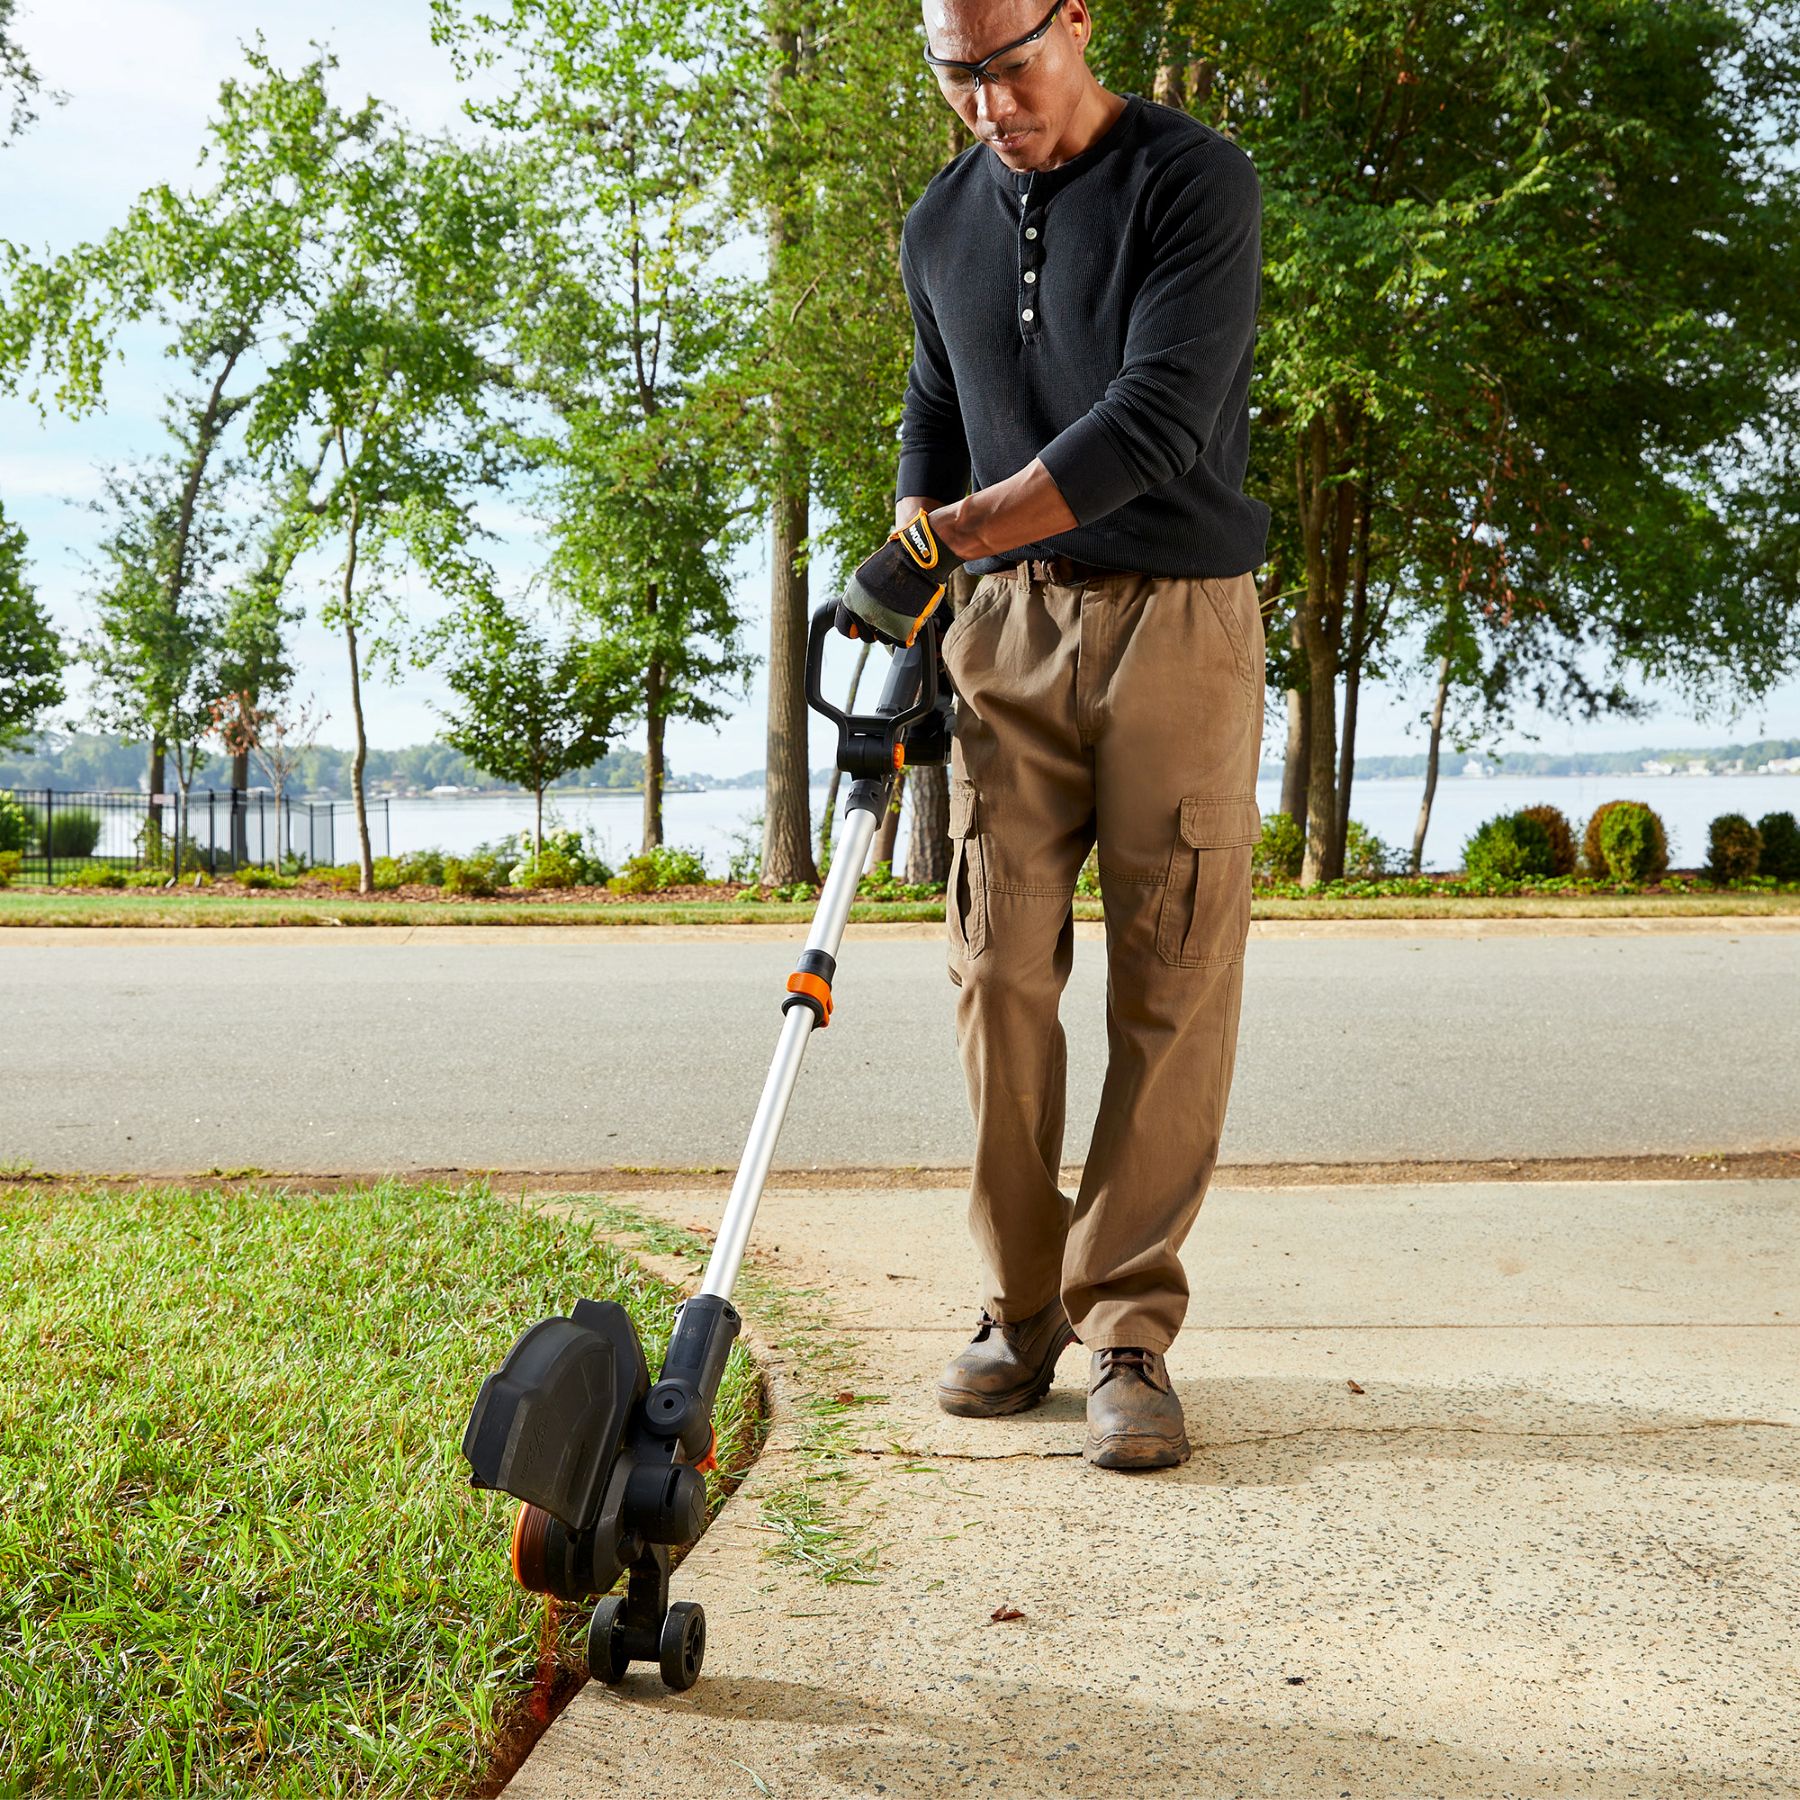 New WORX Nitro 20V, 13 Inch Brushless String Trimmer Is Reliable Performer for Home Landscapes